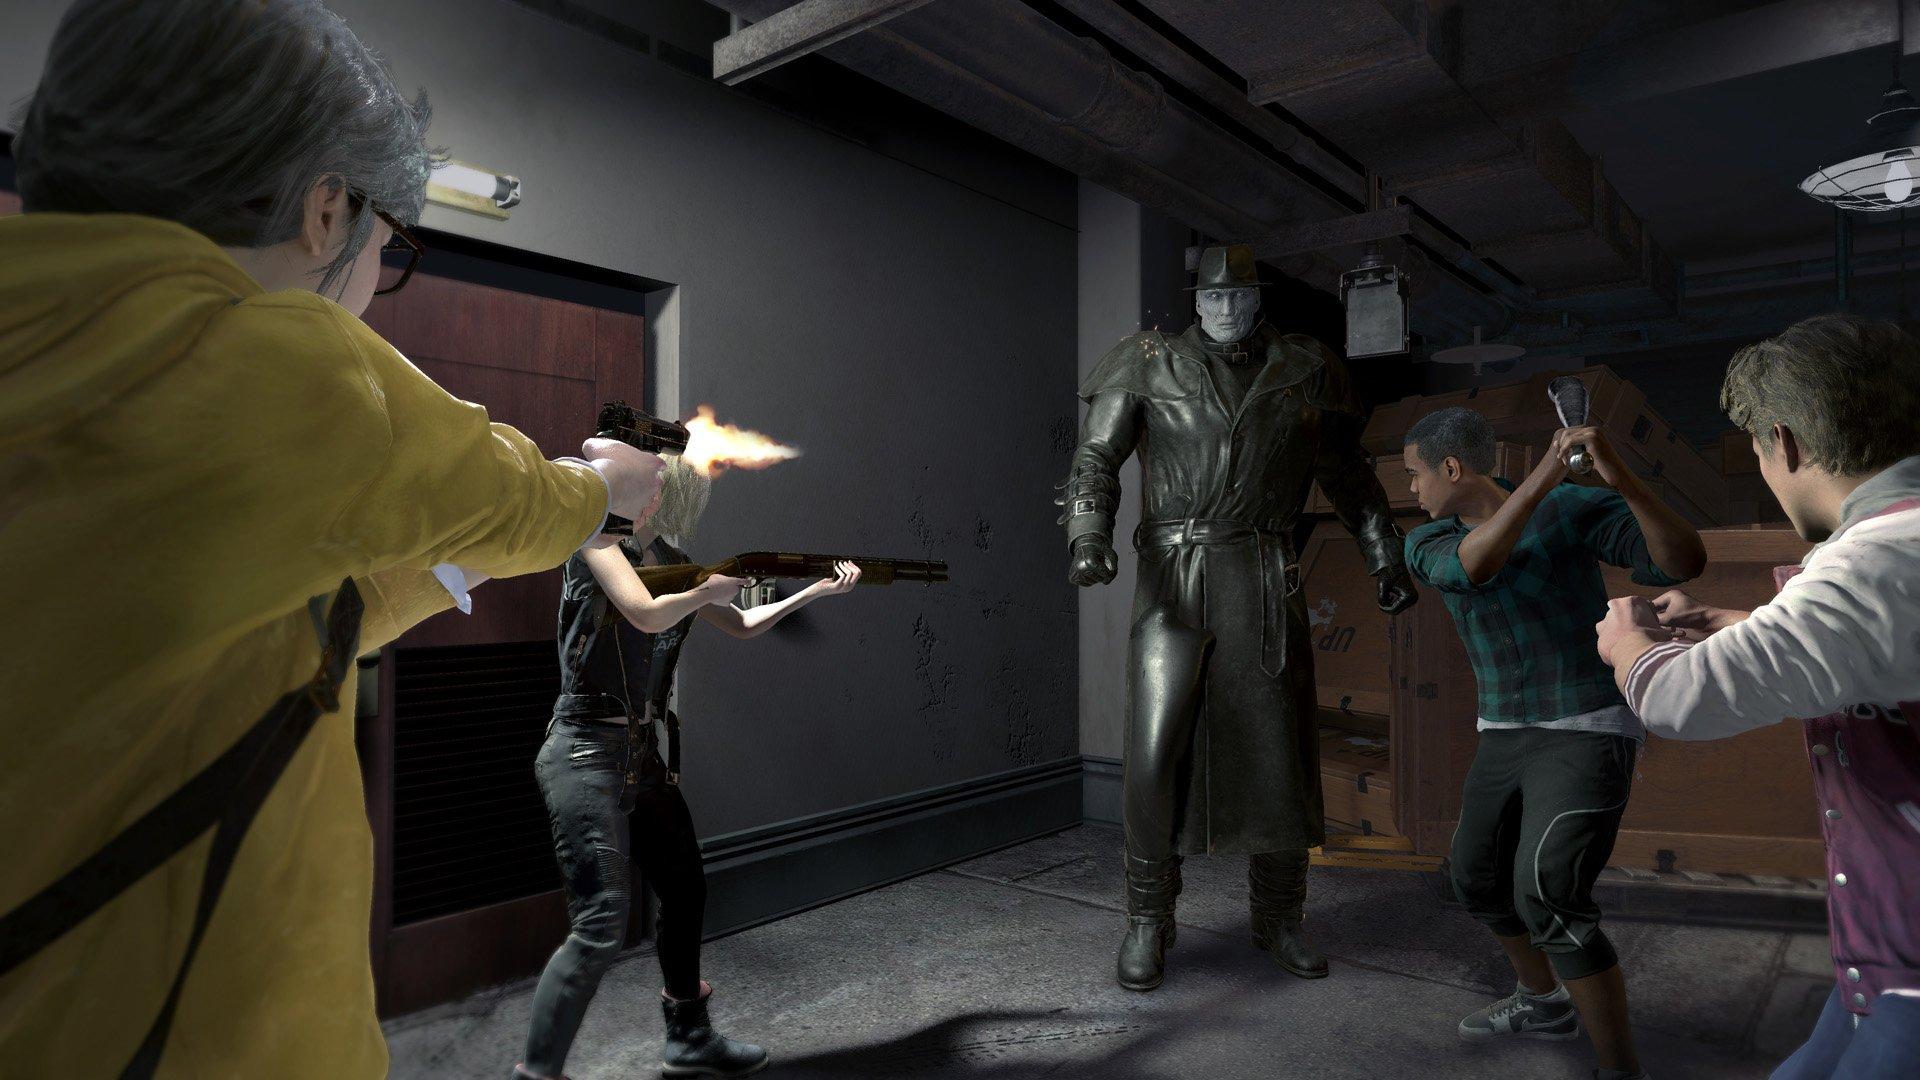 RESIDENT EVIL 3 PS4 REVIEW: Another Must Own Remake?